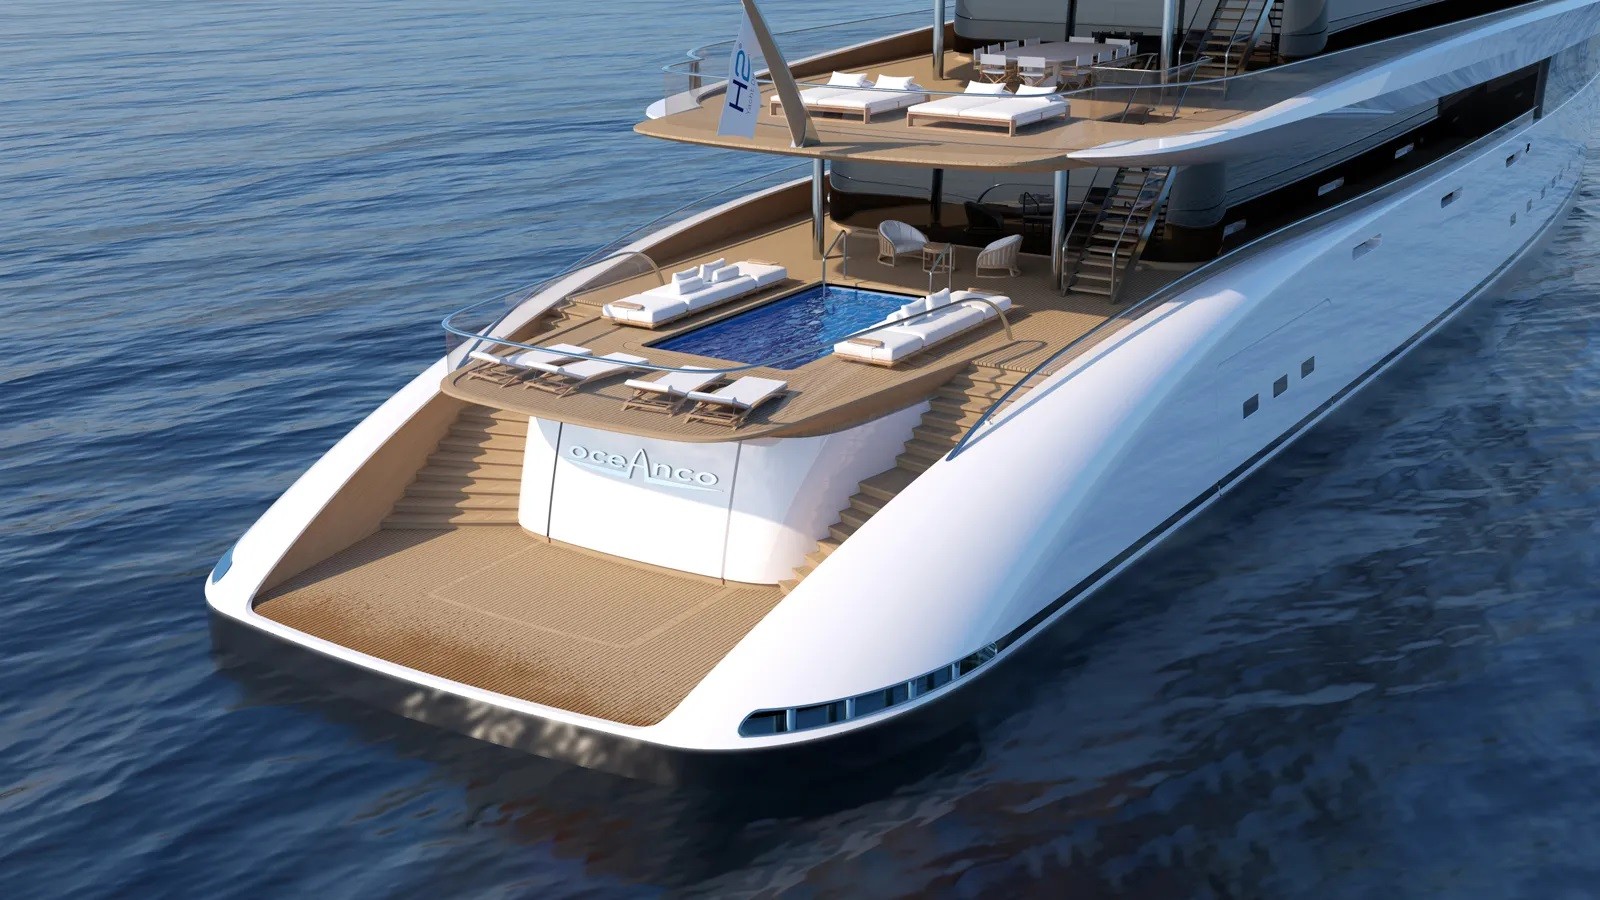 Oceanco Reveals Two New Design Proposals for Its Simply Custom ...